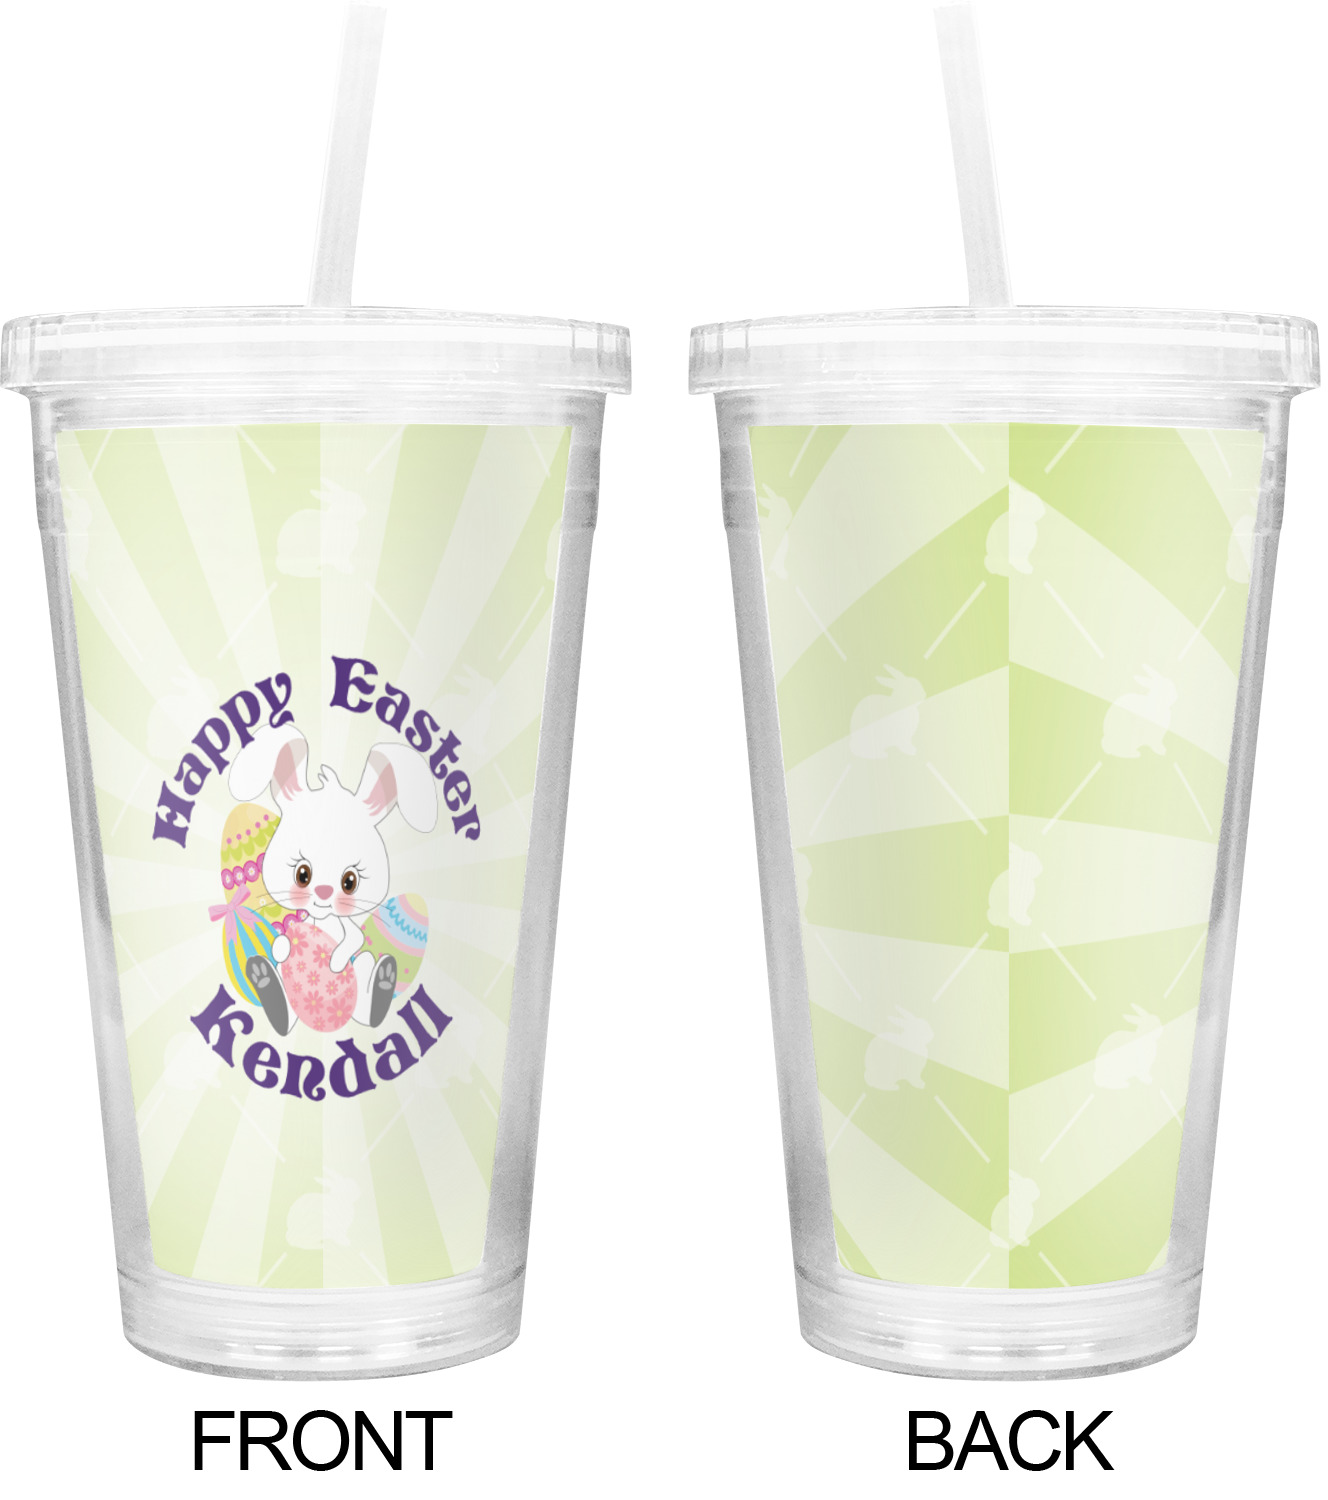 https://www.youcustomizeit.com/common/MAKE/591604/Easter-Bunny-Double-Wall-Tumbler-with-Straw-Approval.jpg?lm=1671191457